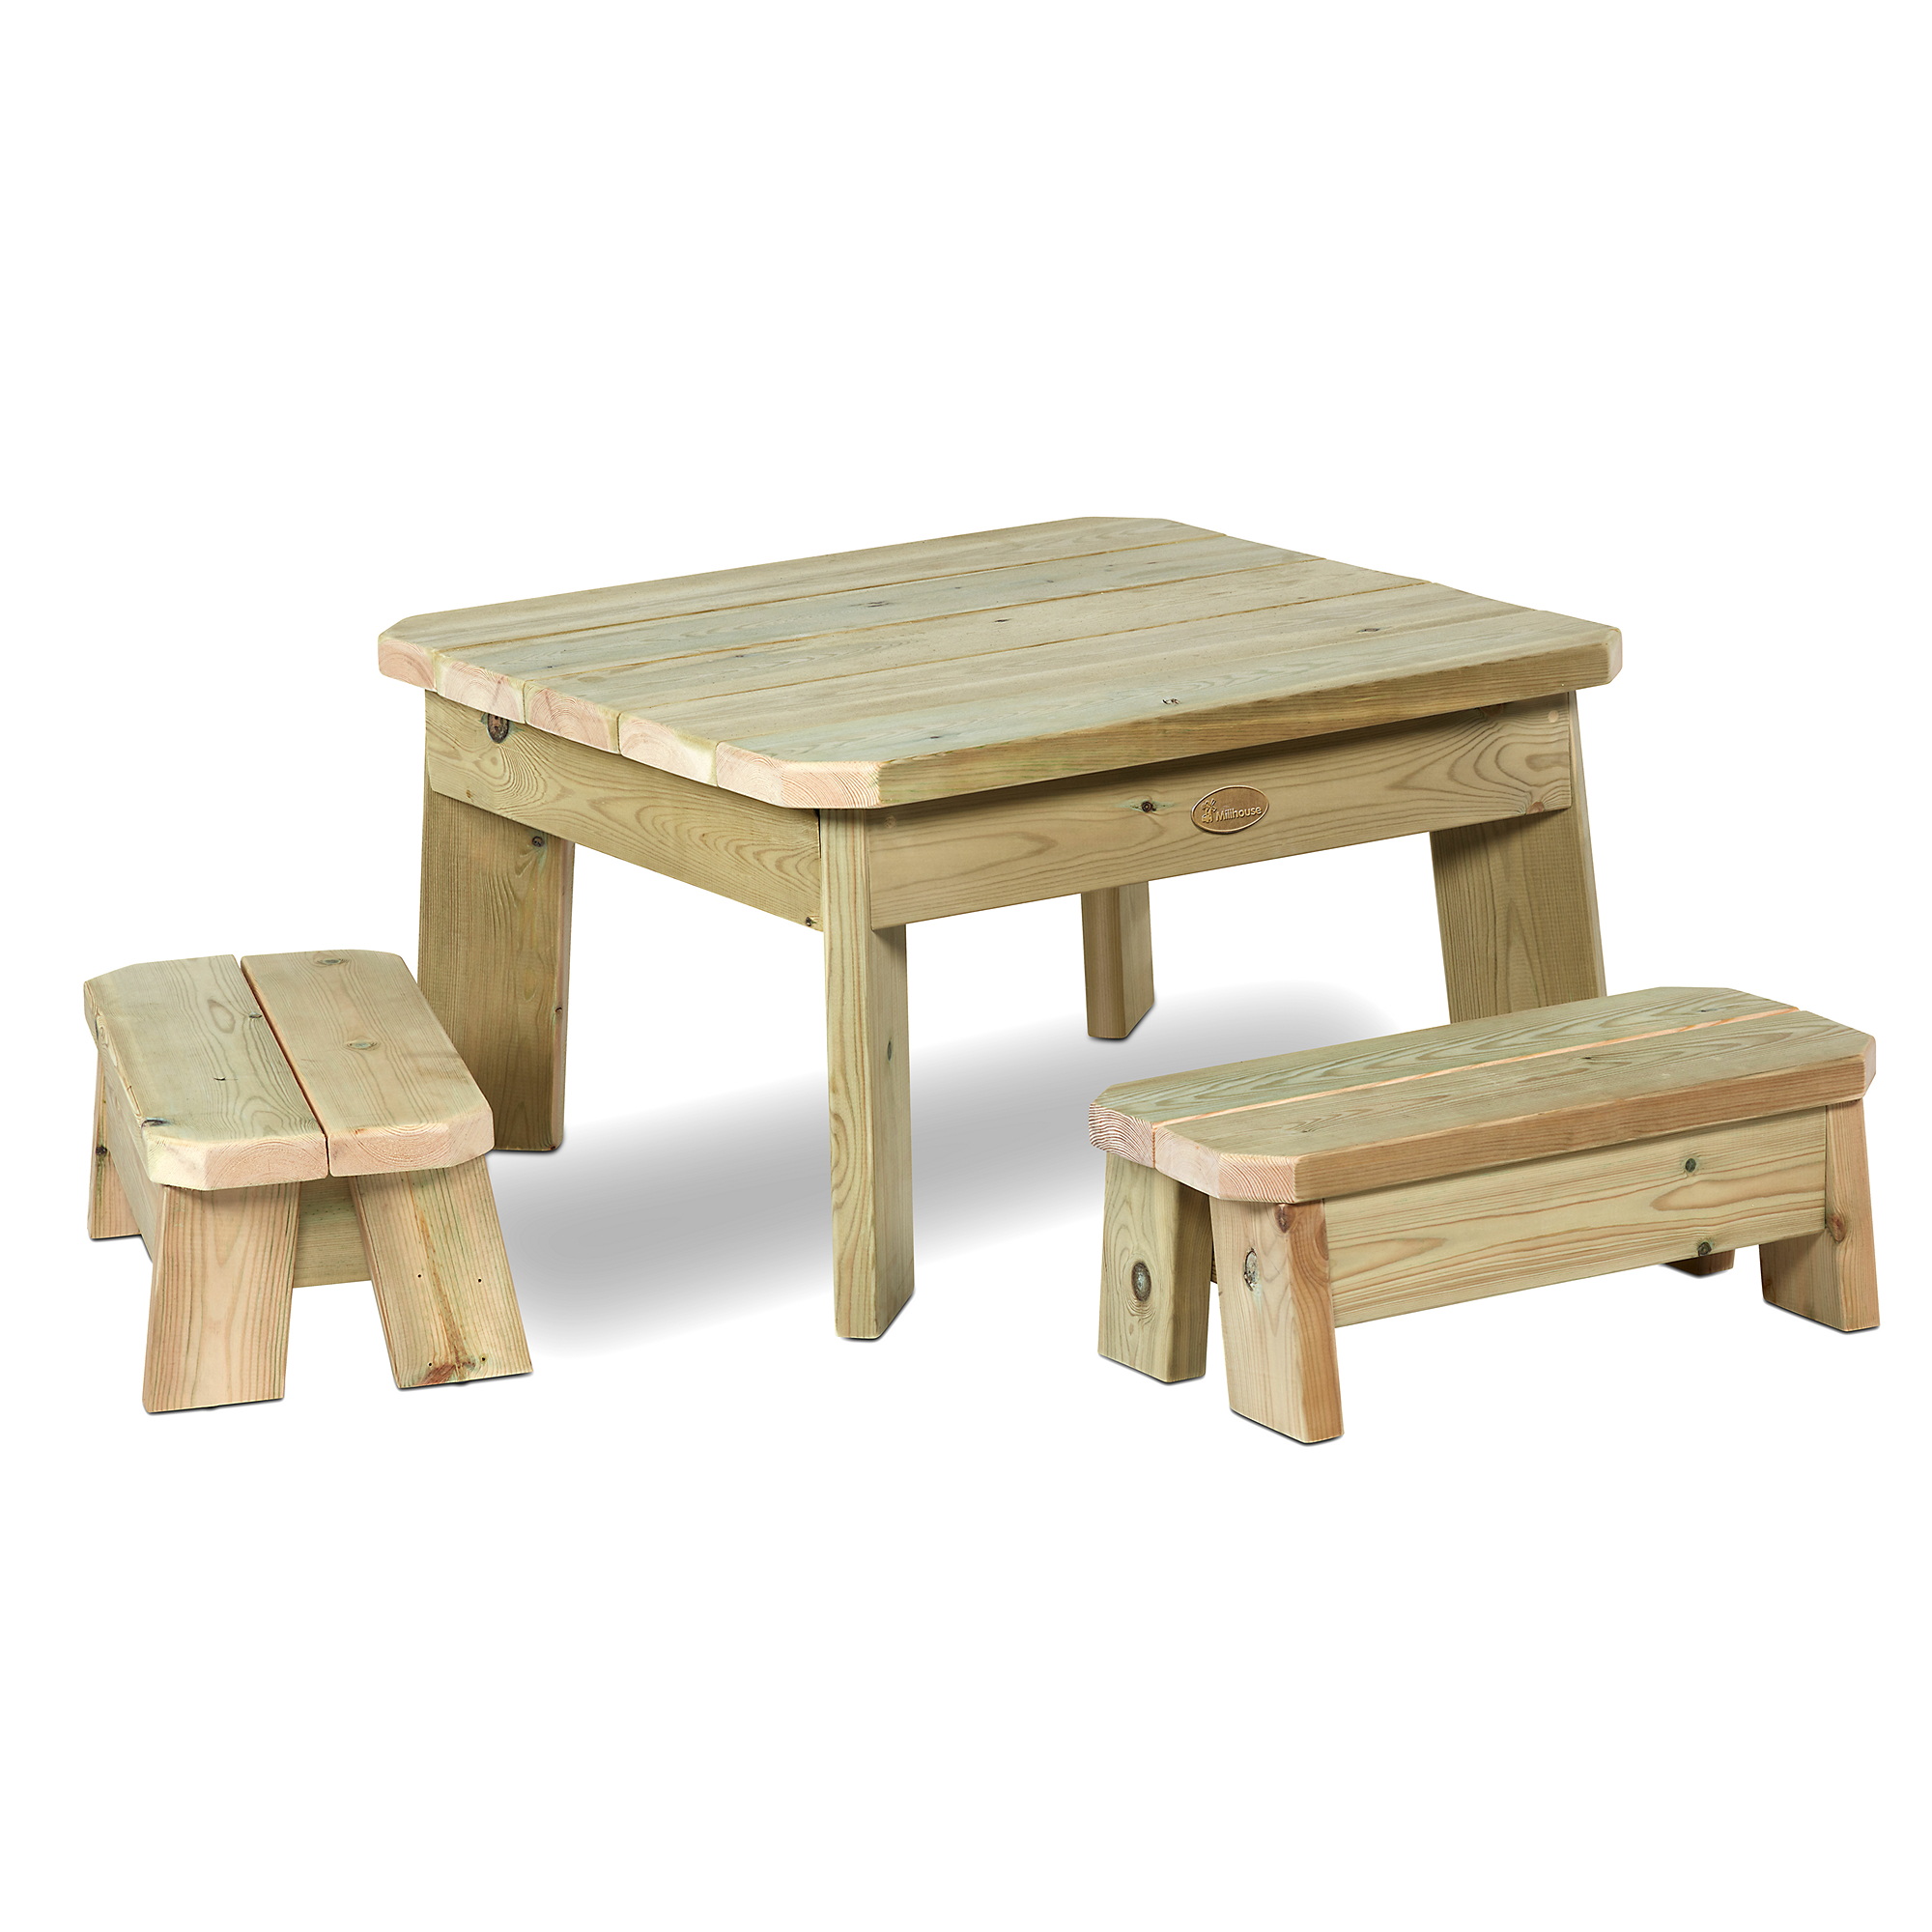 Square Table And Bench Set (preschool)